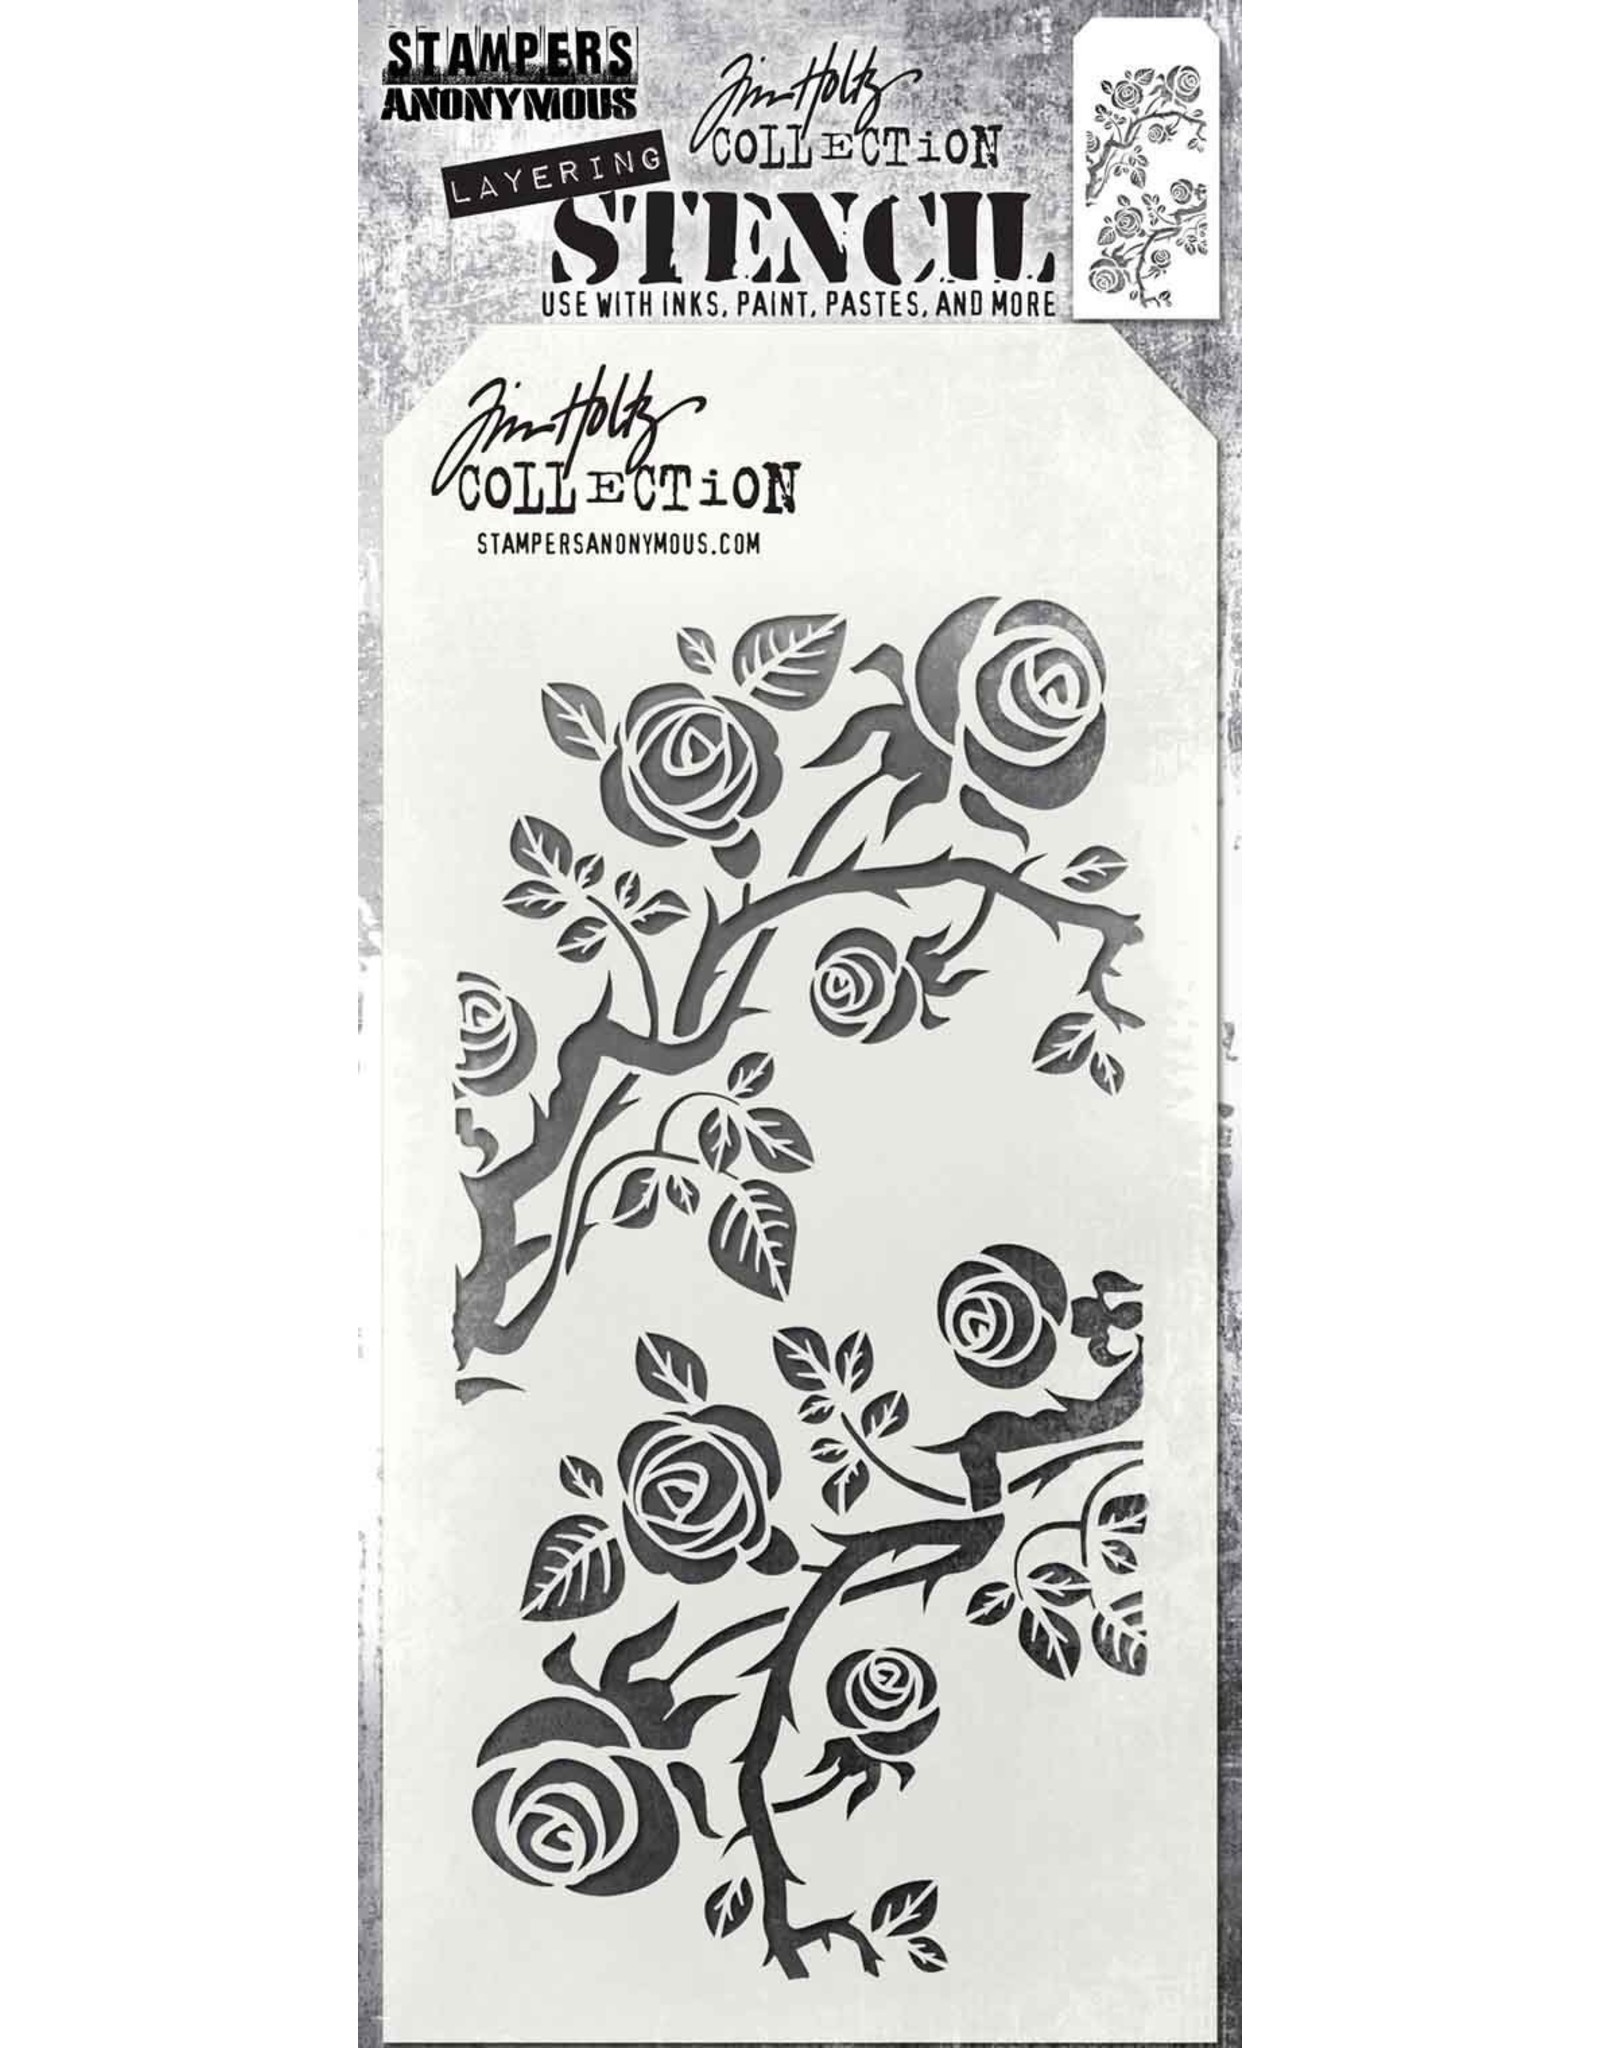 Tim Holtz - Stampers Anonymous THORNED-LAYERED STENCIL